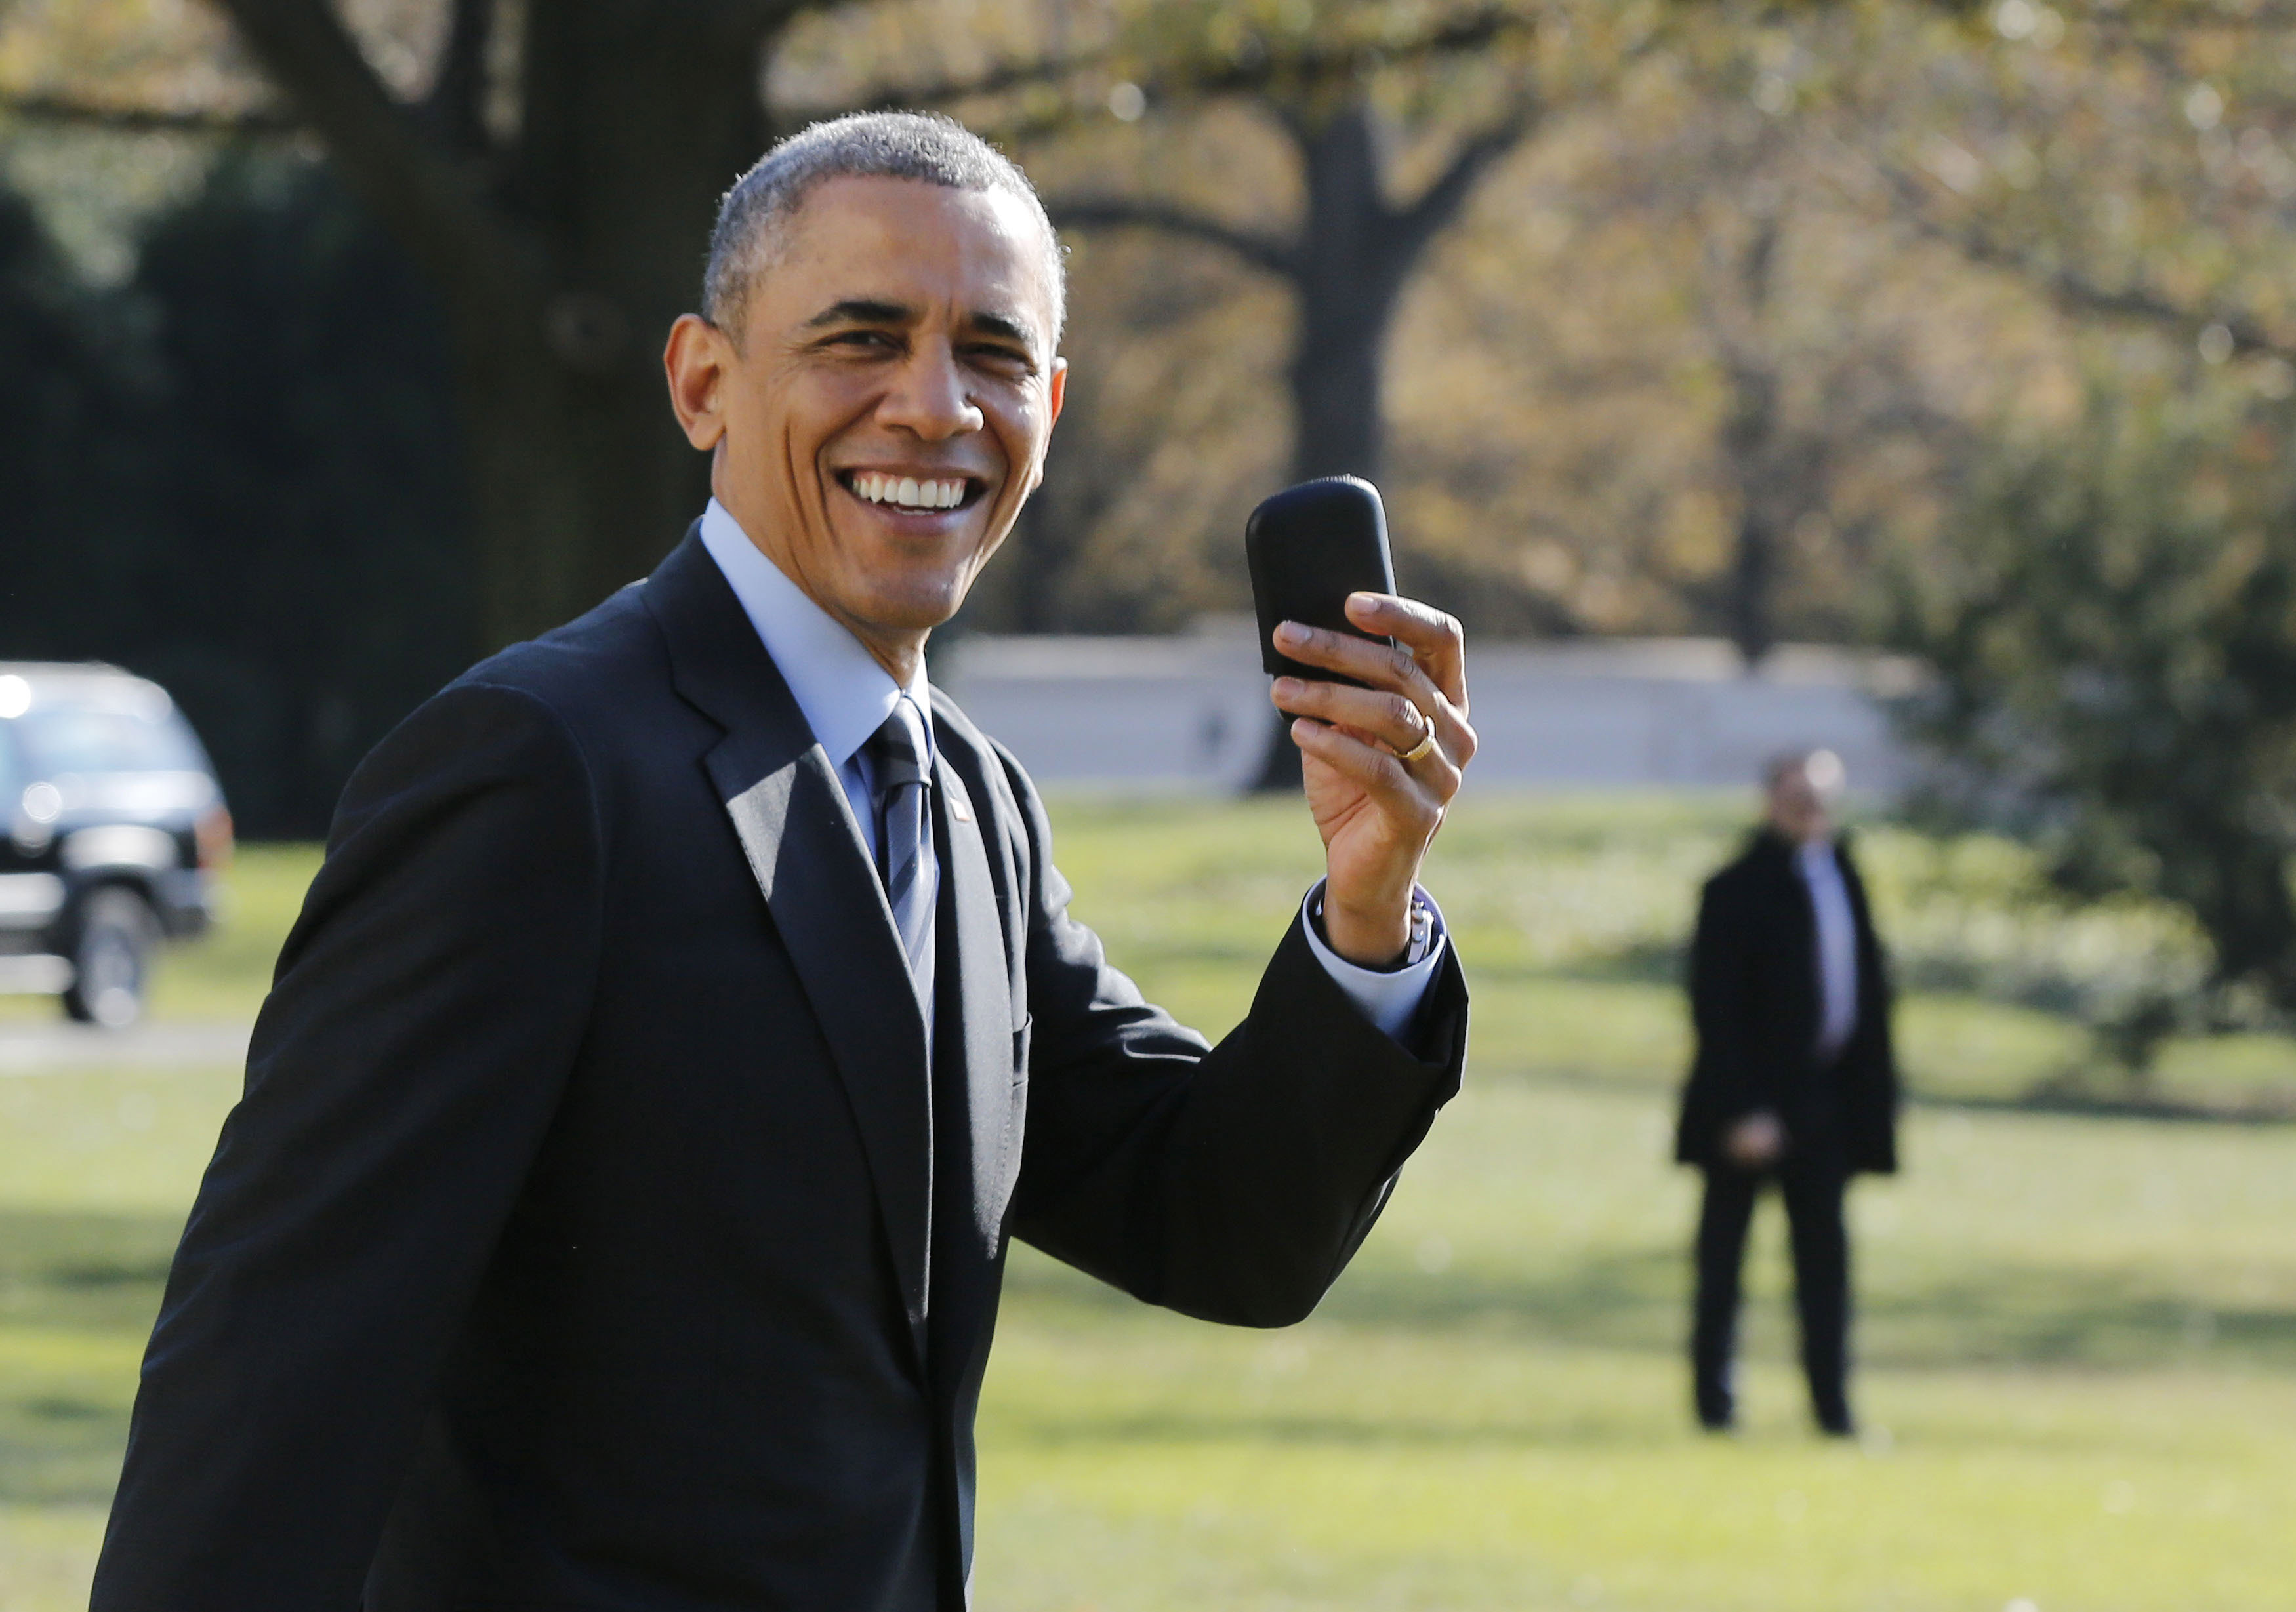 U.S. President Barack Obama holds up his BlackBerry device after he returned inside the White House to retrieve it, after boarding Marine One on the South Lawn of the White House in Washington on Nov. 21, 2014. (Larry Downing—Reuters)